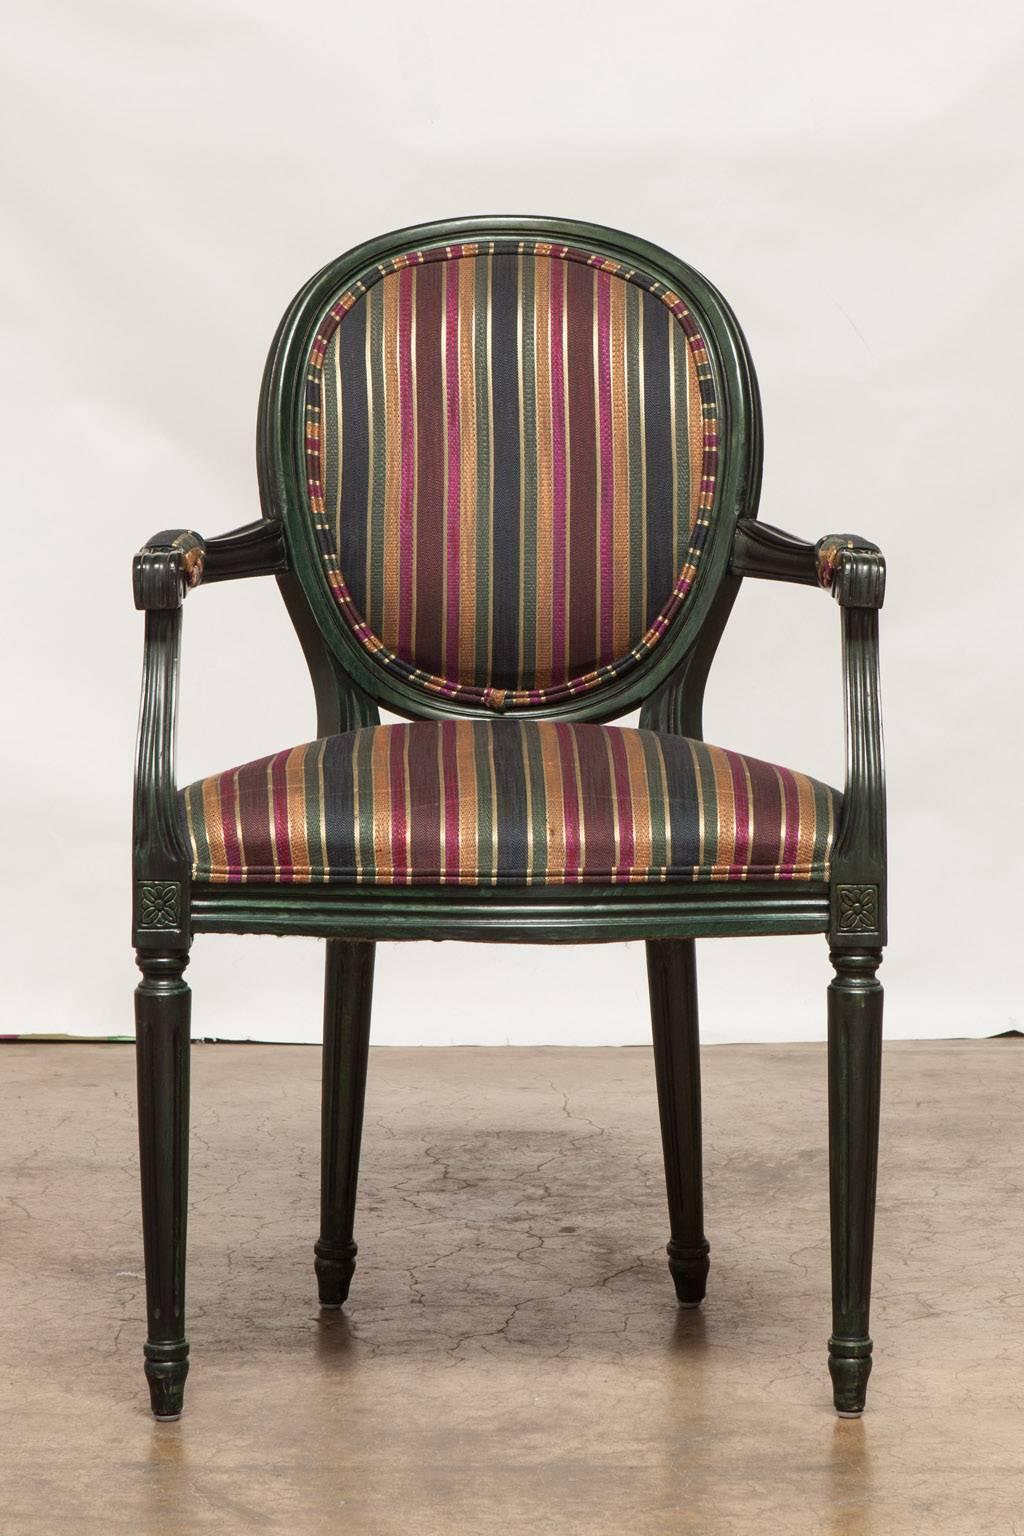 Chic set of French Louis XVI style armchairs featuring a dark malachite green lacquer finish. Upholstered in a striped pattern brocade fabric. Made in Italy for 